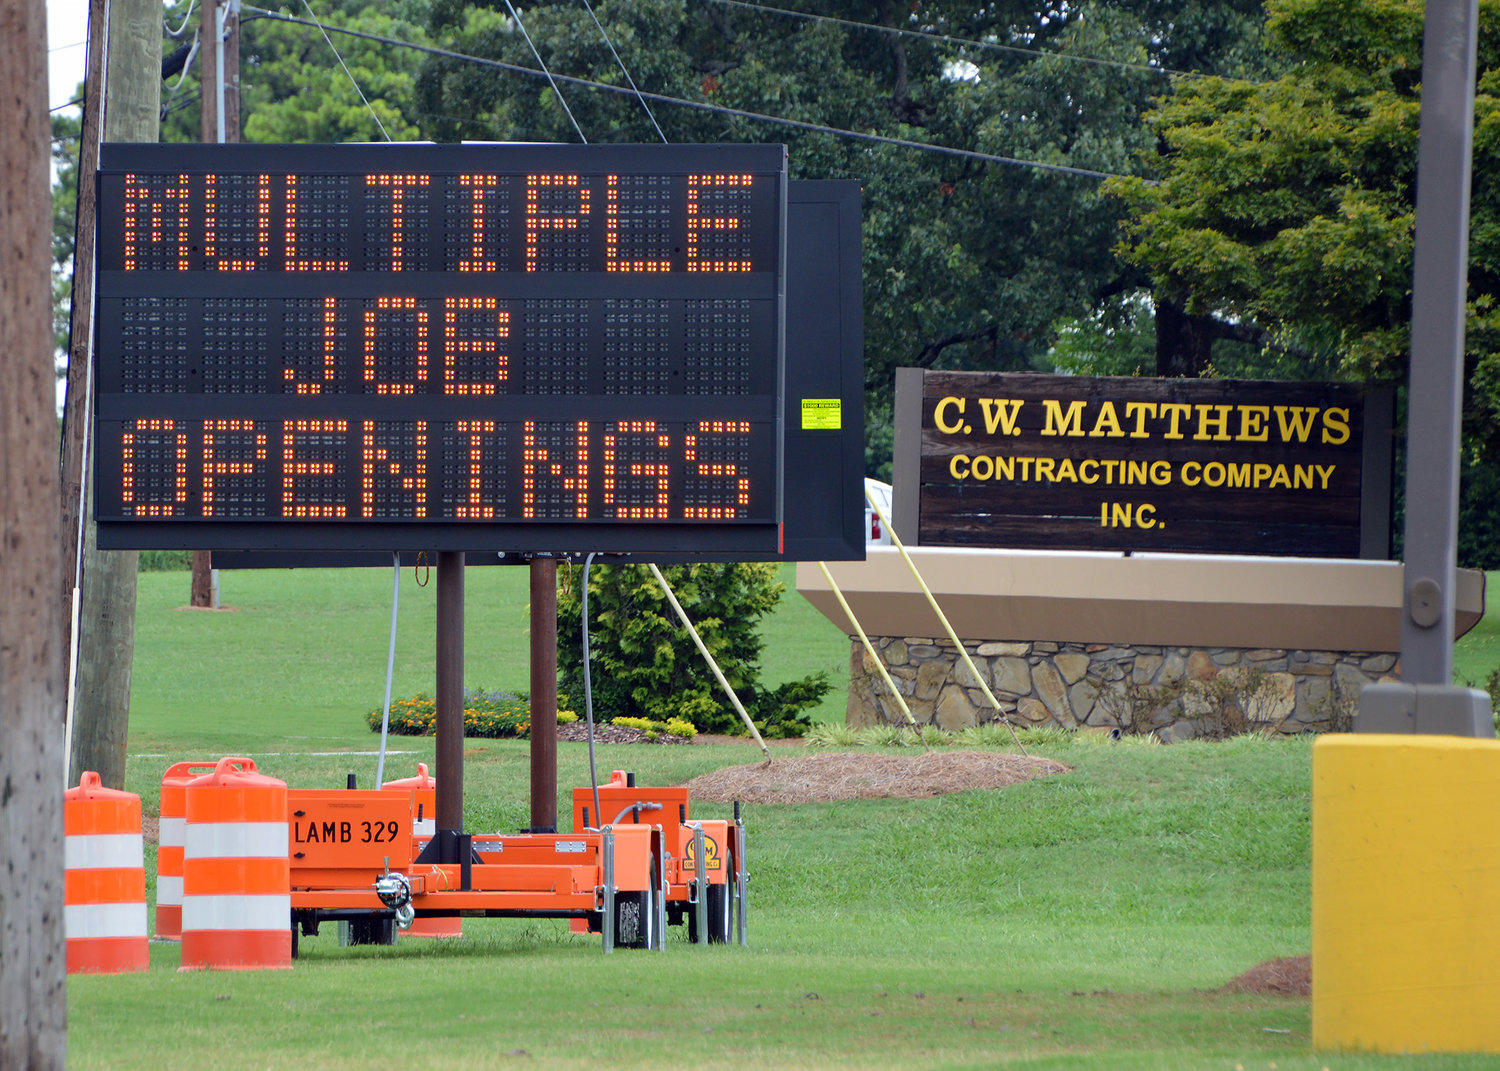 A sign advertises job openings at C.W. Matthews in Marietta, Ga. (Christian Index/Henry Durand)